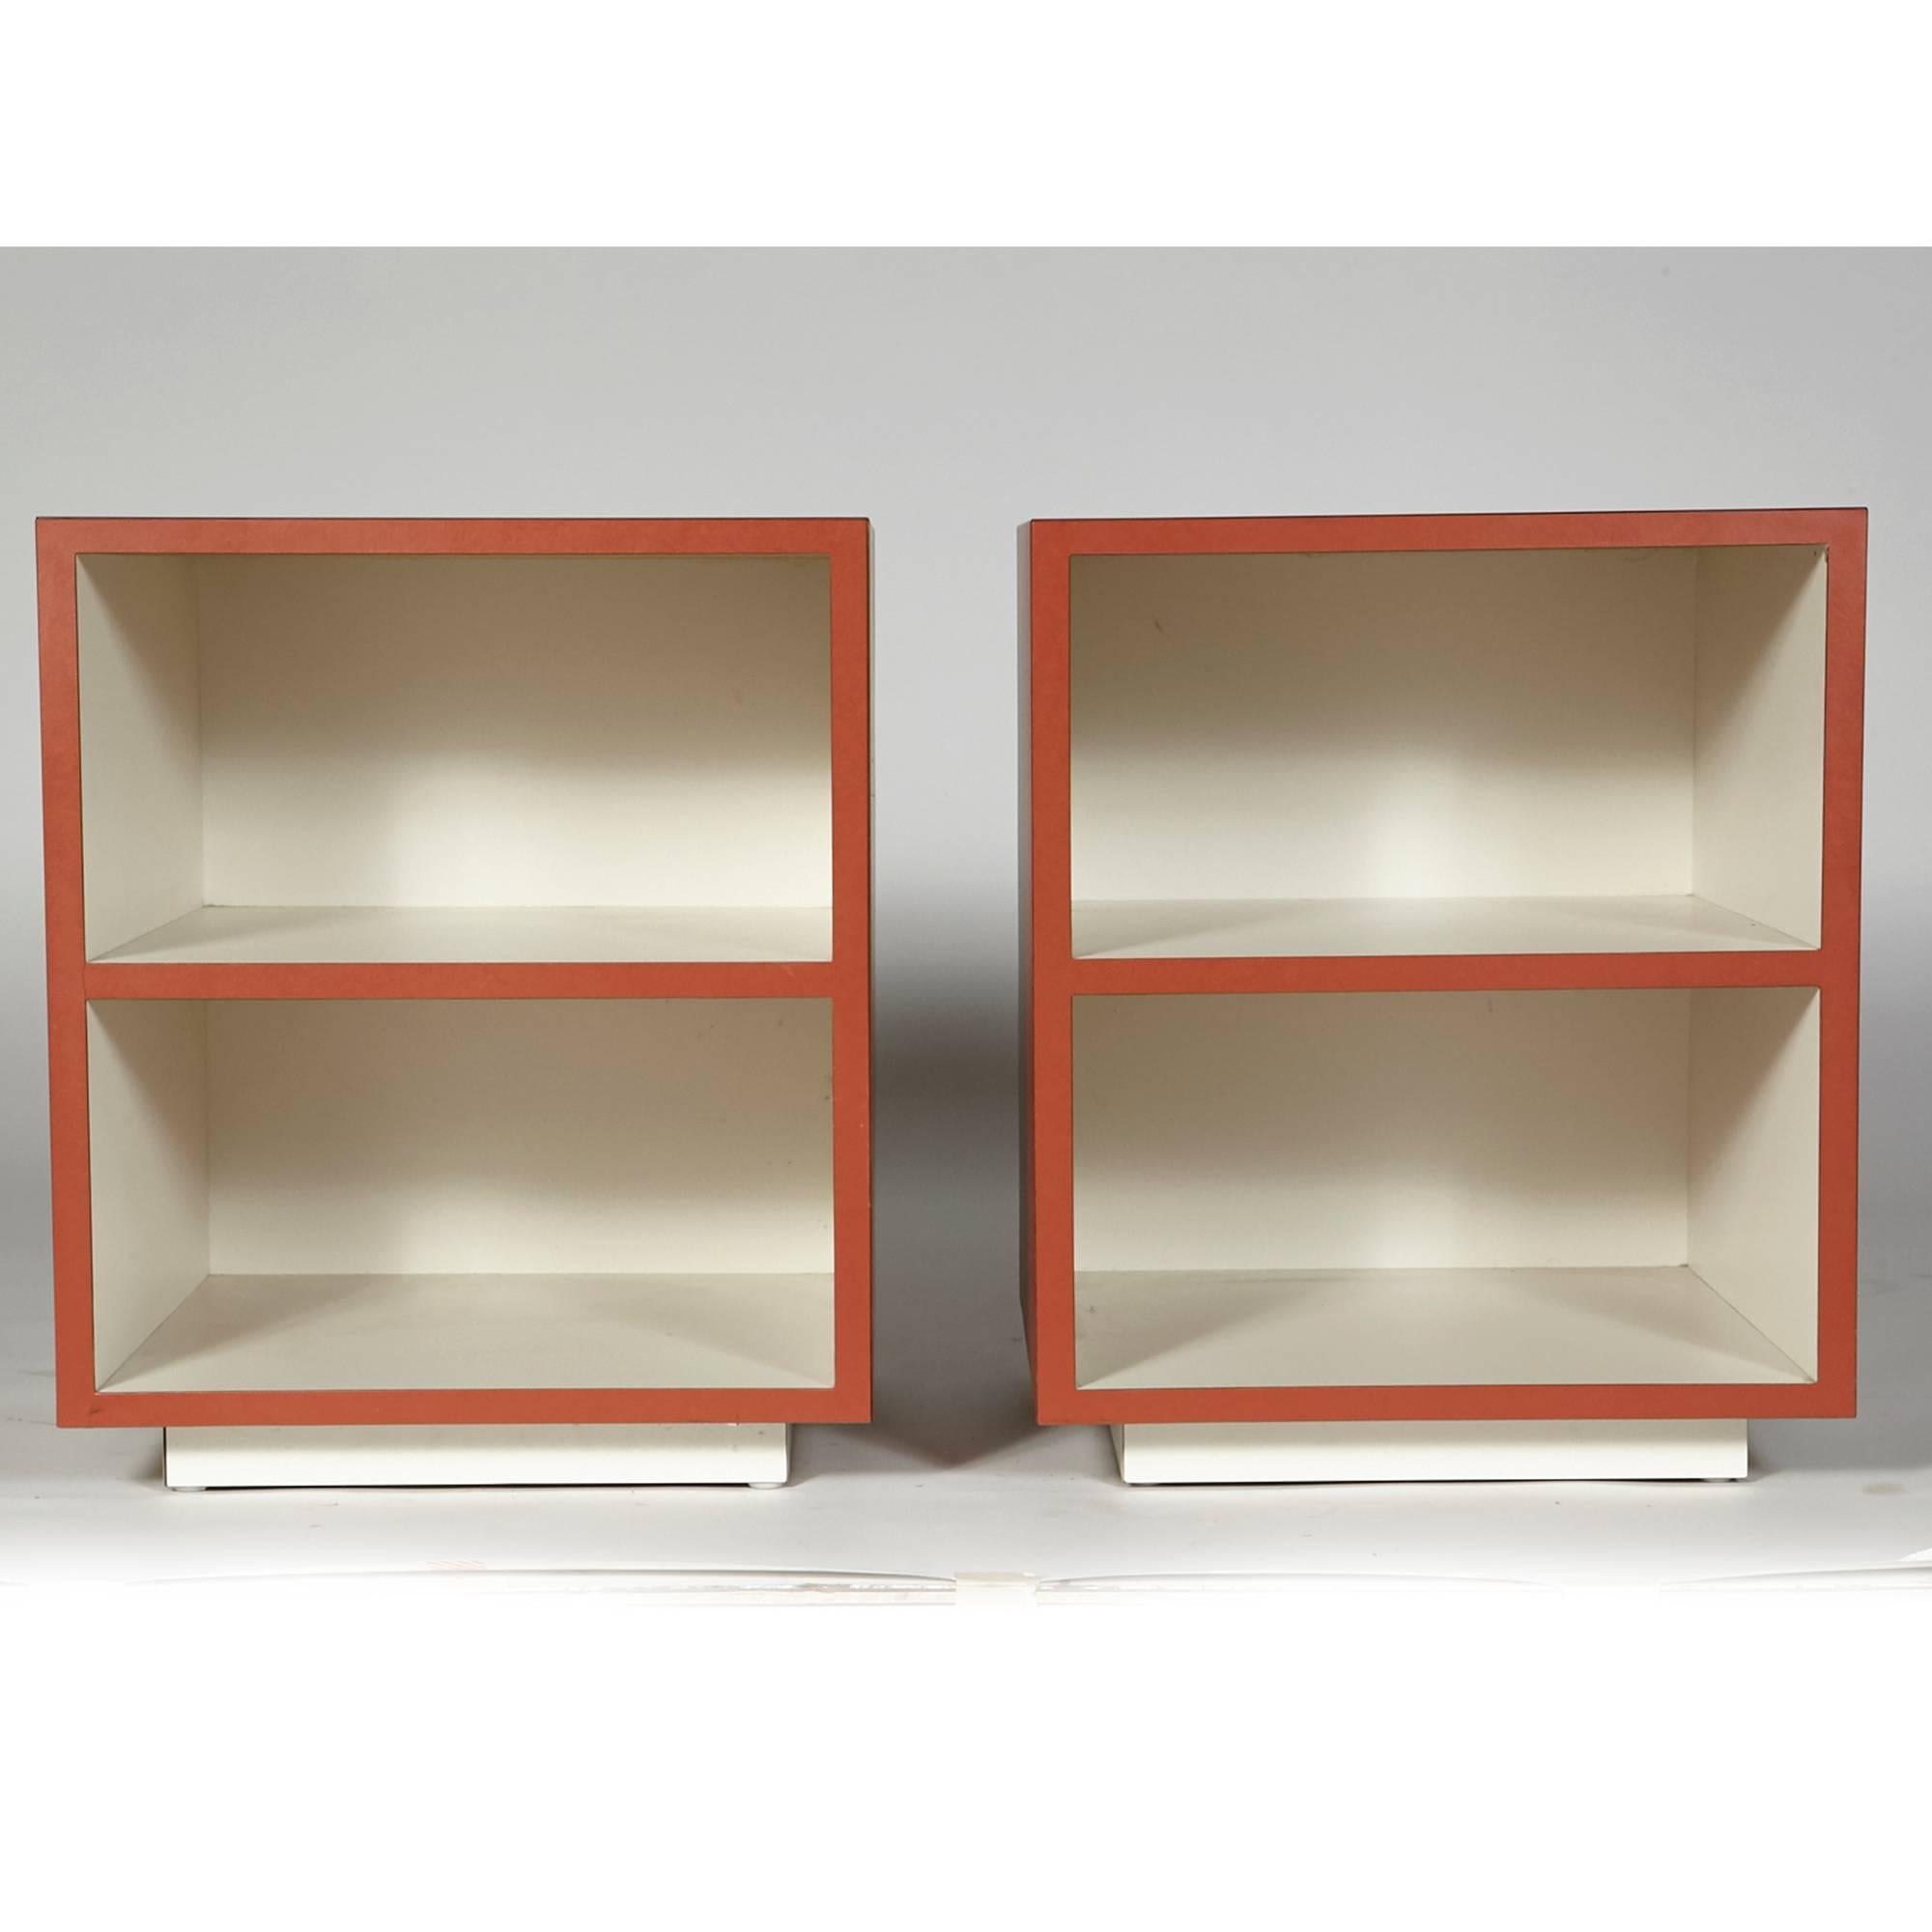 Vintage pair of orange and white laminated open storage cube side tables, circa 1970s. Excellent condition. Unmarked.